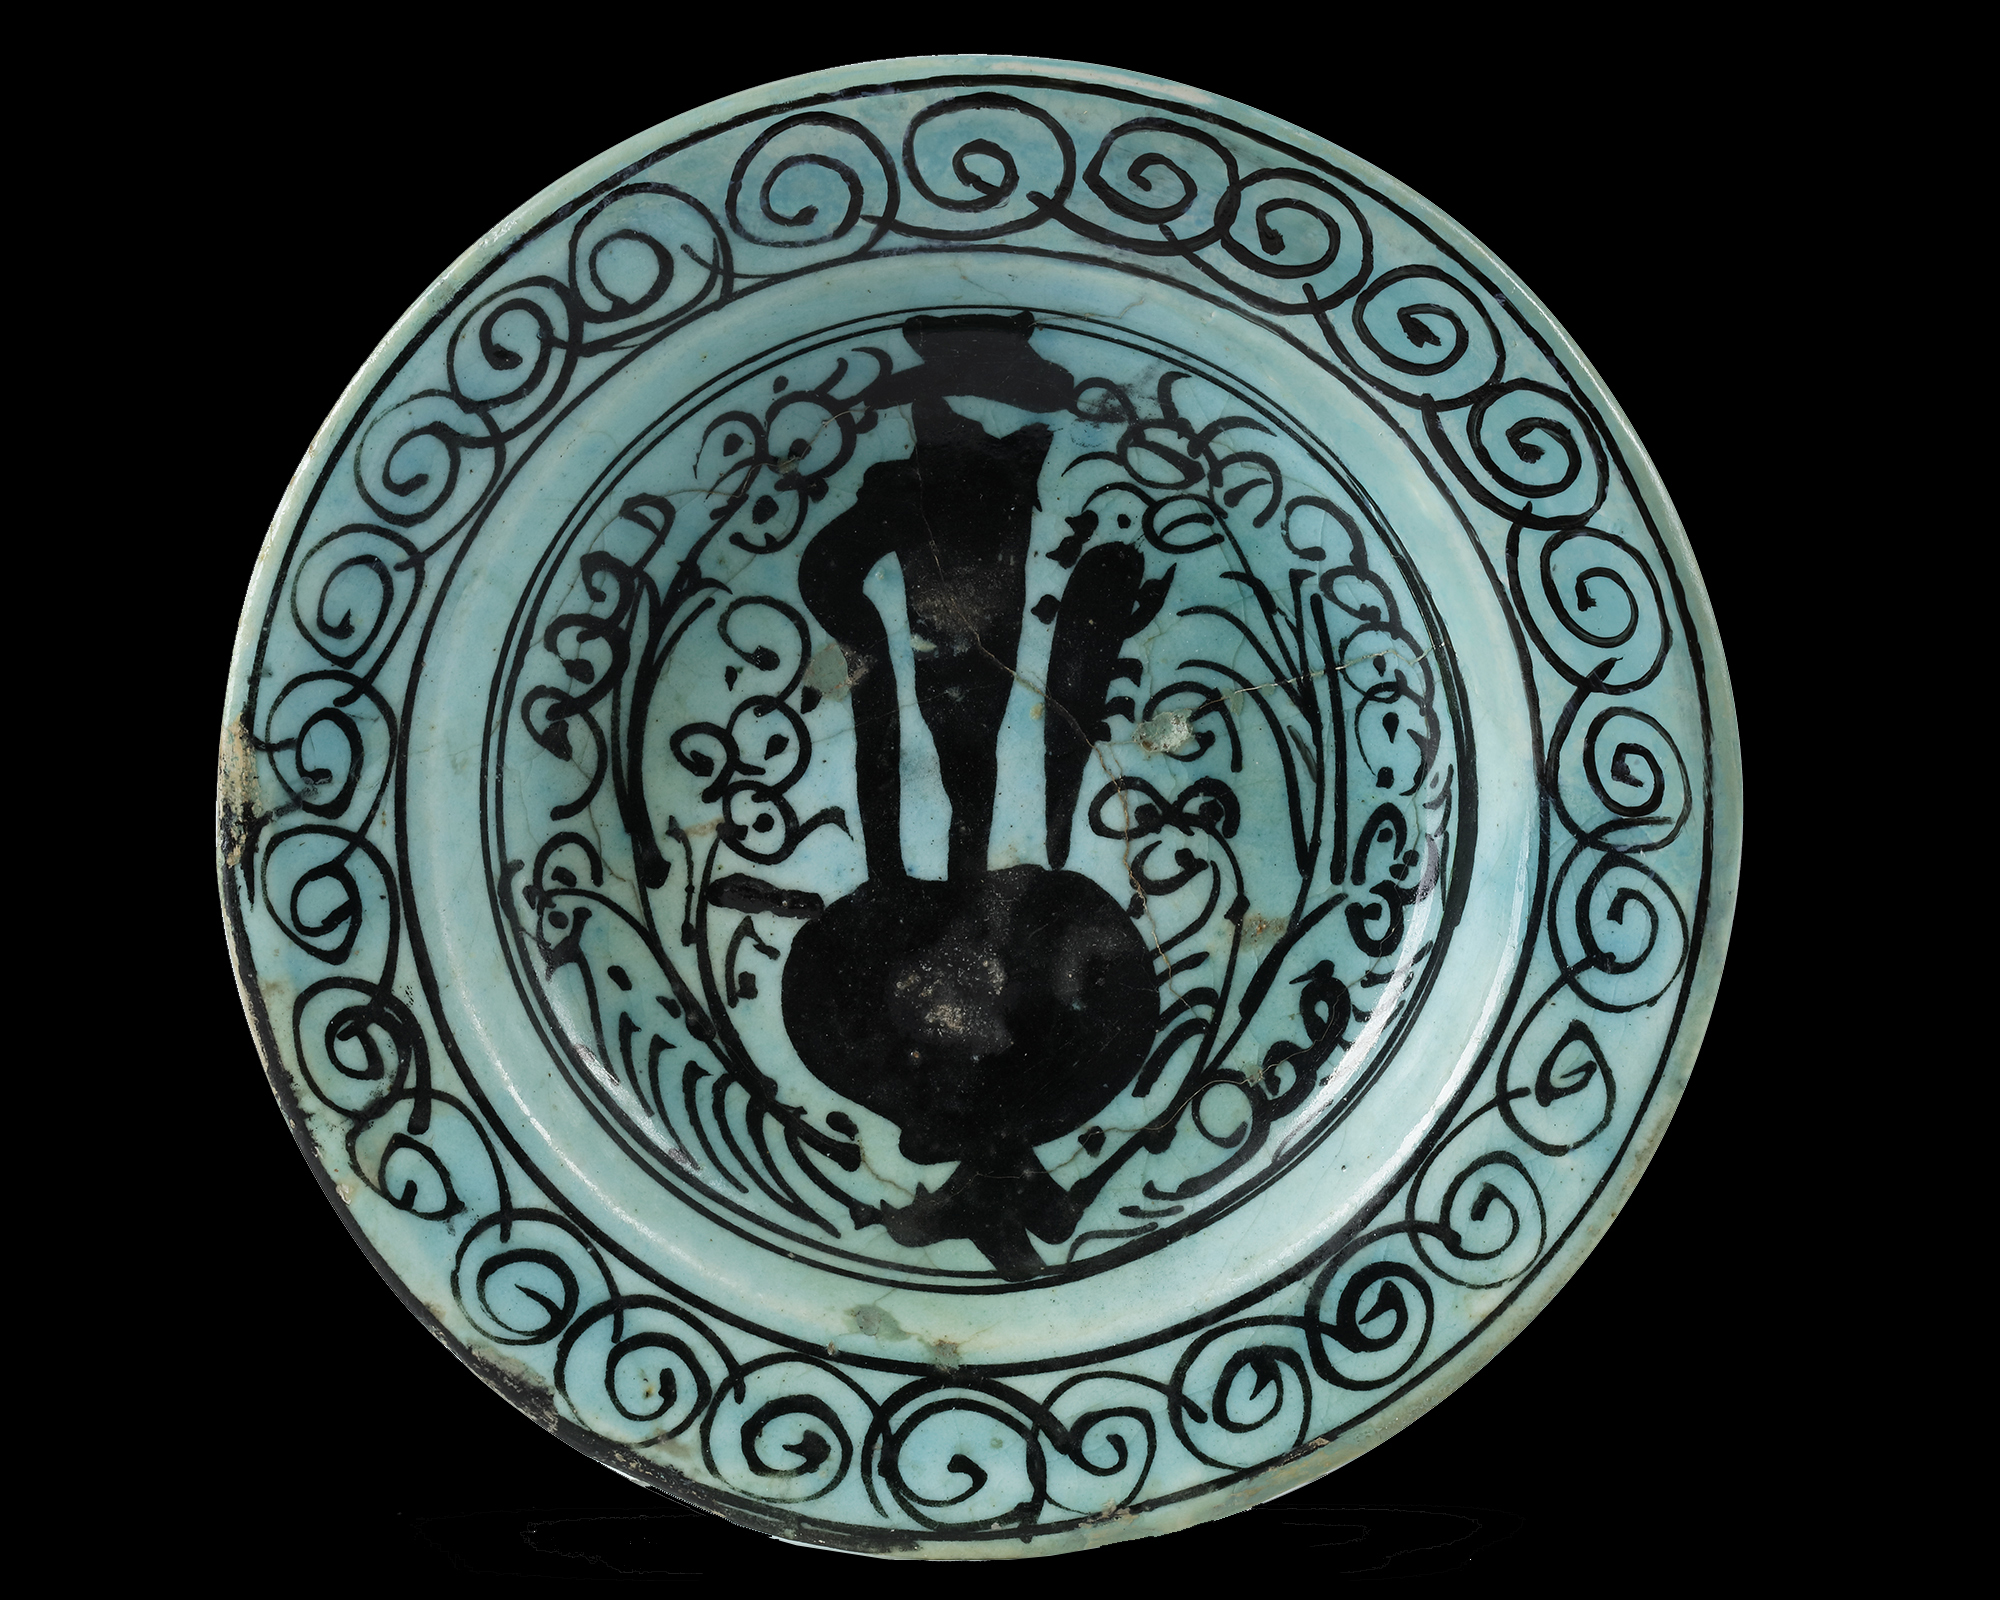 A DAMASCUS POTTERY DISH, OTTOMAN PROVINCES, SECOND HALF 16TH CENTURY - Image 3 of 3